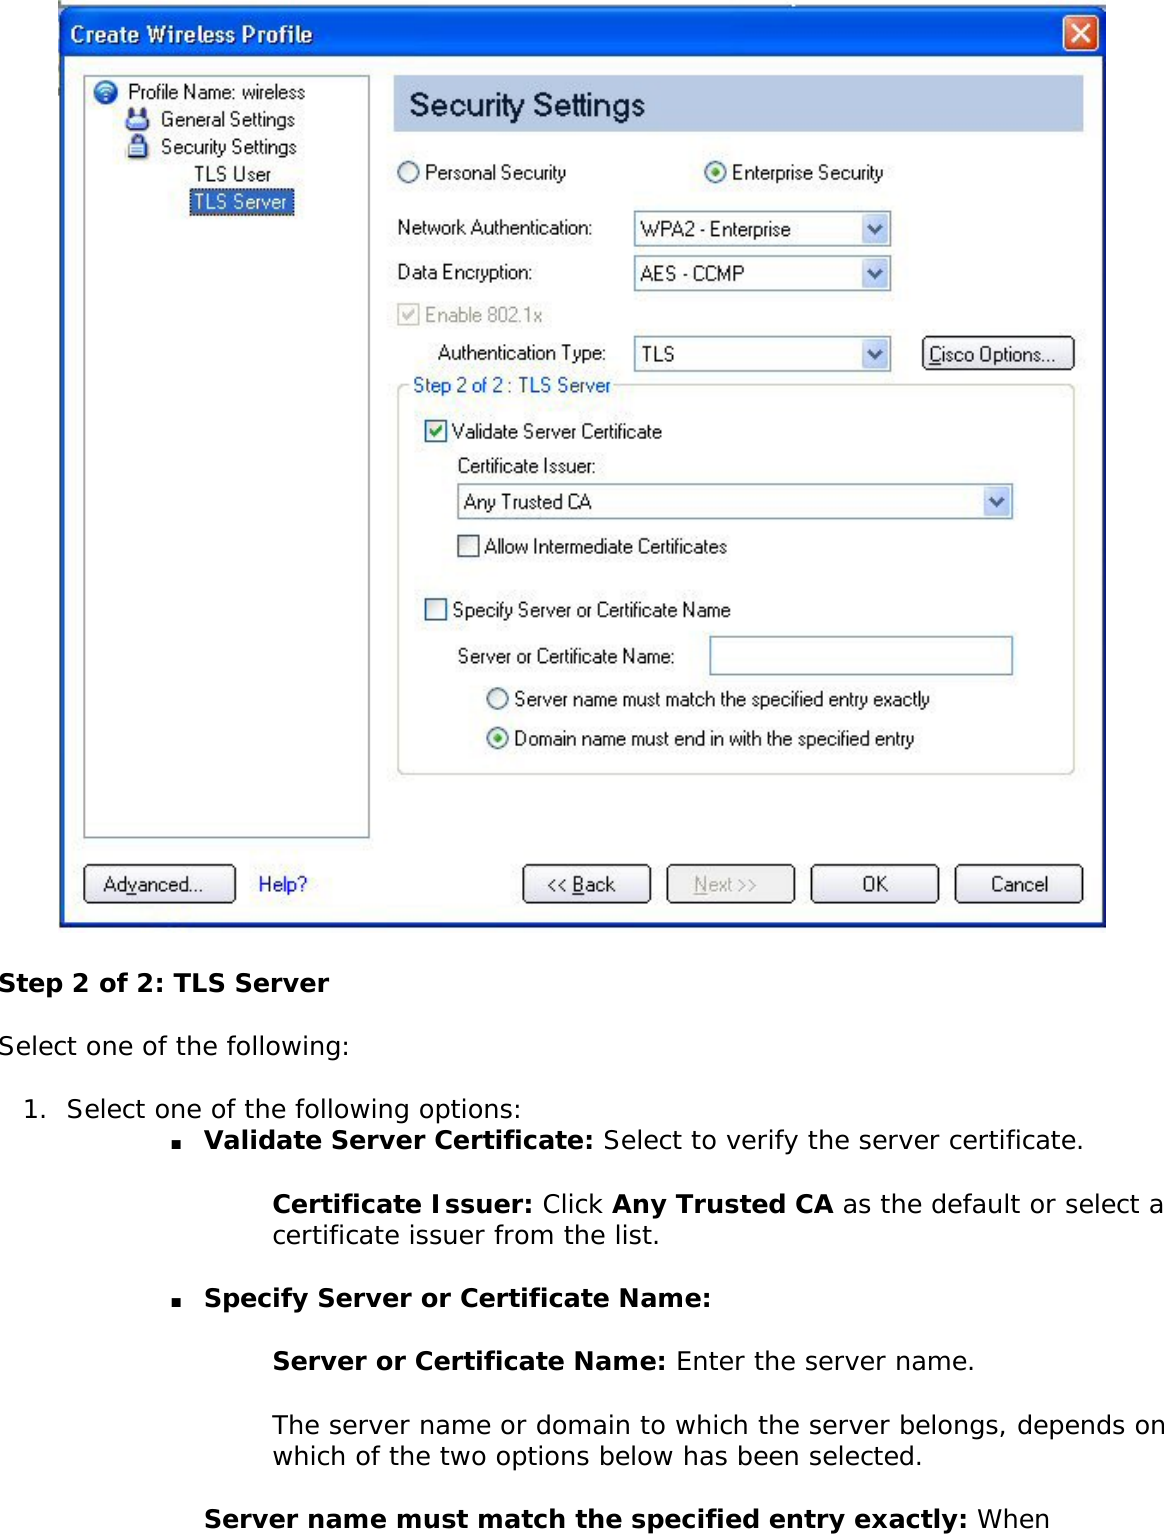  Step 2 of 2: TLS ServerSelect one of the following: 1.  Select one of the following options: ■     Validate Server Certificate: Select to verify the server certificate. Certificate Issuer: Click Any Trusted CA as the default or select a certificate issuer from the list. ■     Specify Server or Certificate Name: Server or Certificate Name: Enter the server name. The server name or domain to which the server belongs, depends on which of the two options below has been selected. Server name must match the specified entry exactly: When 